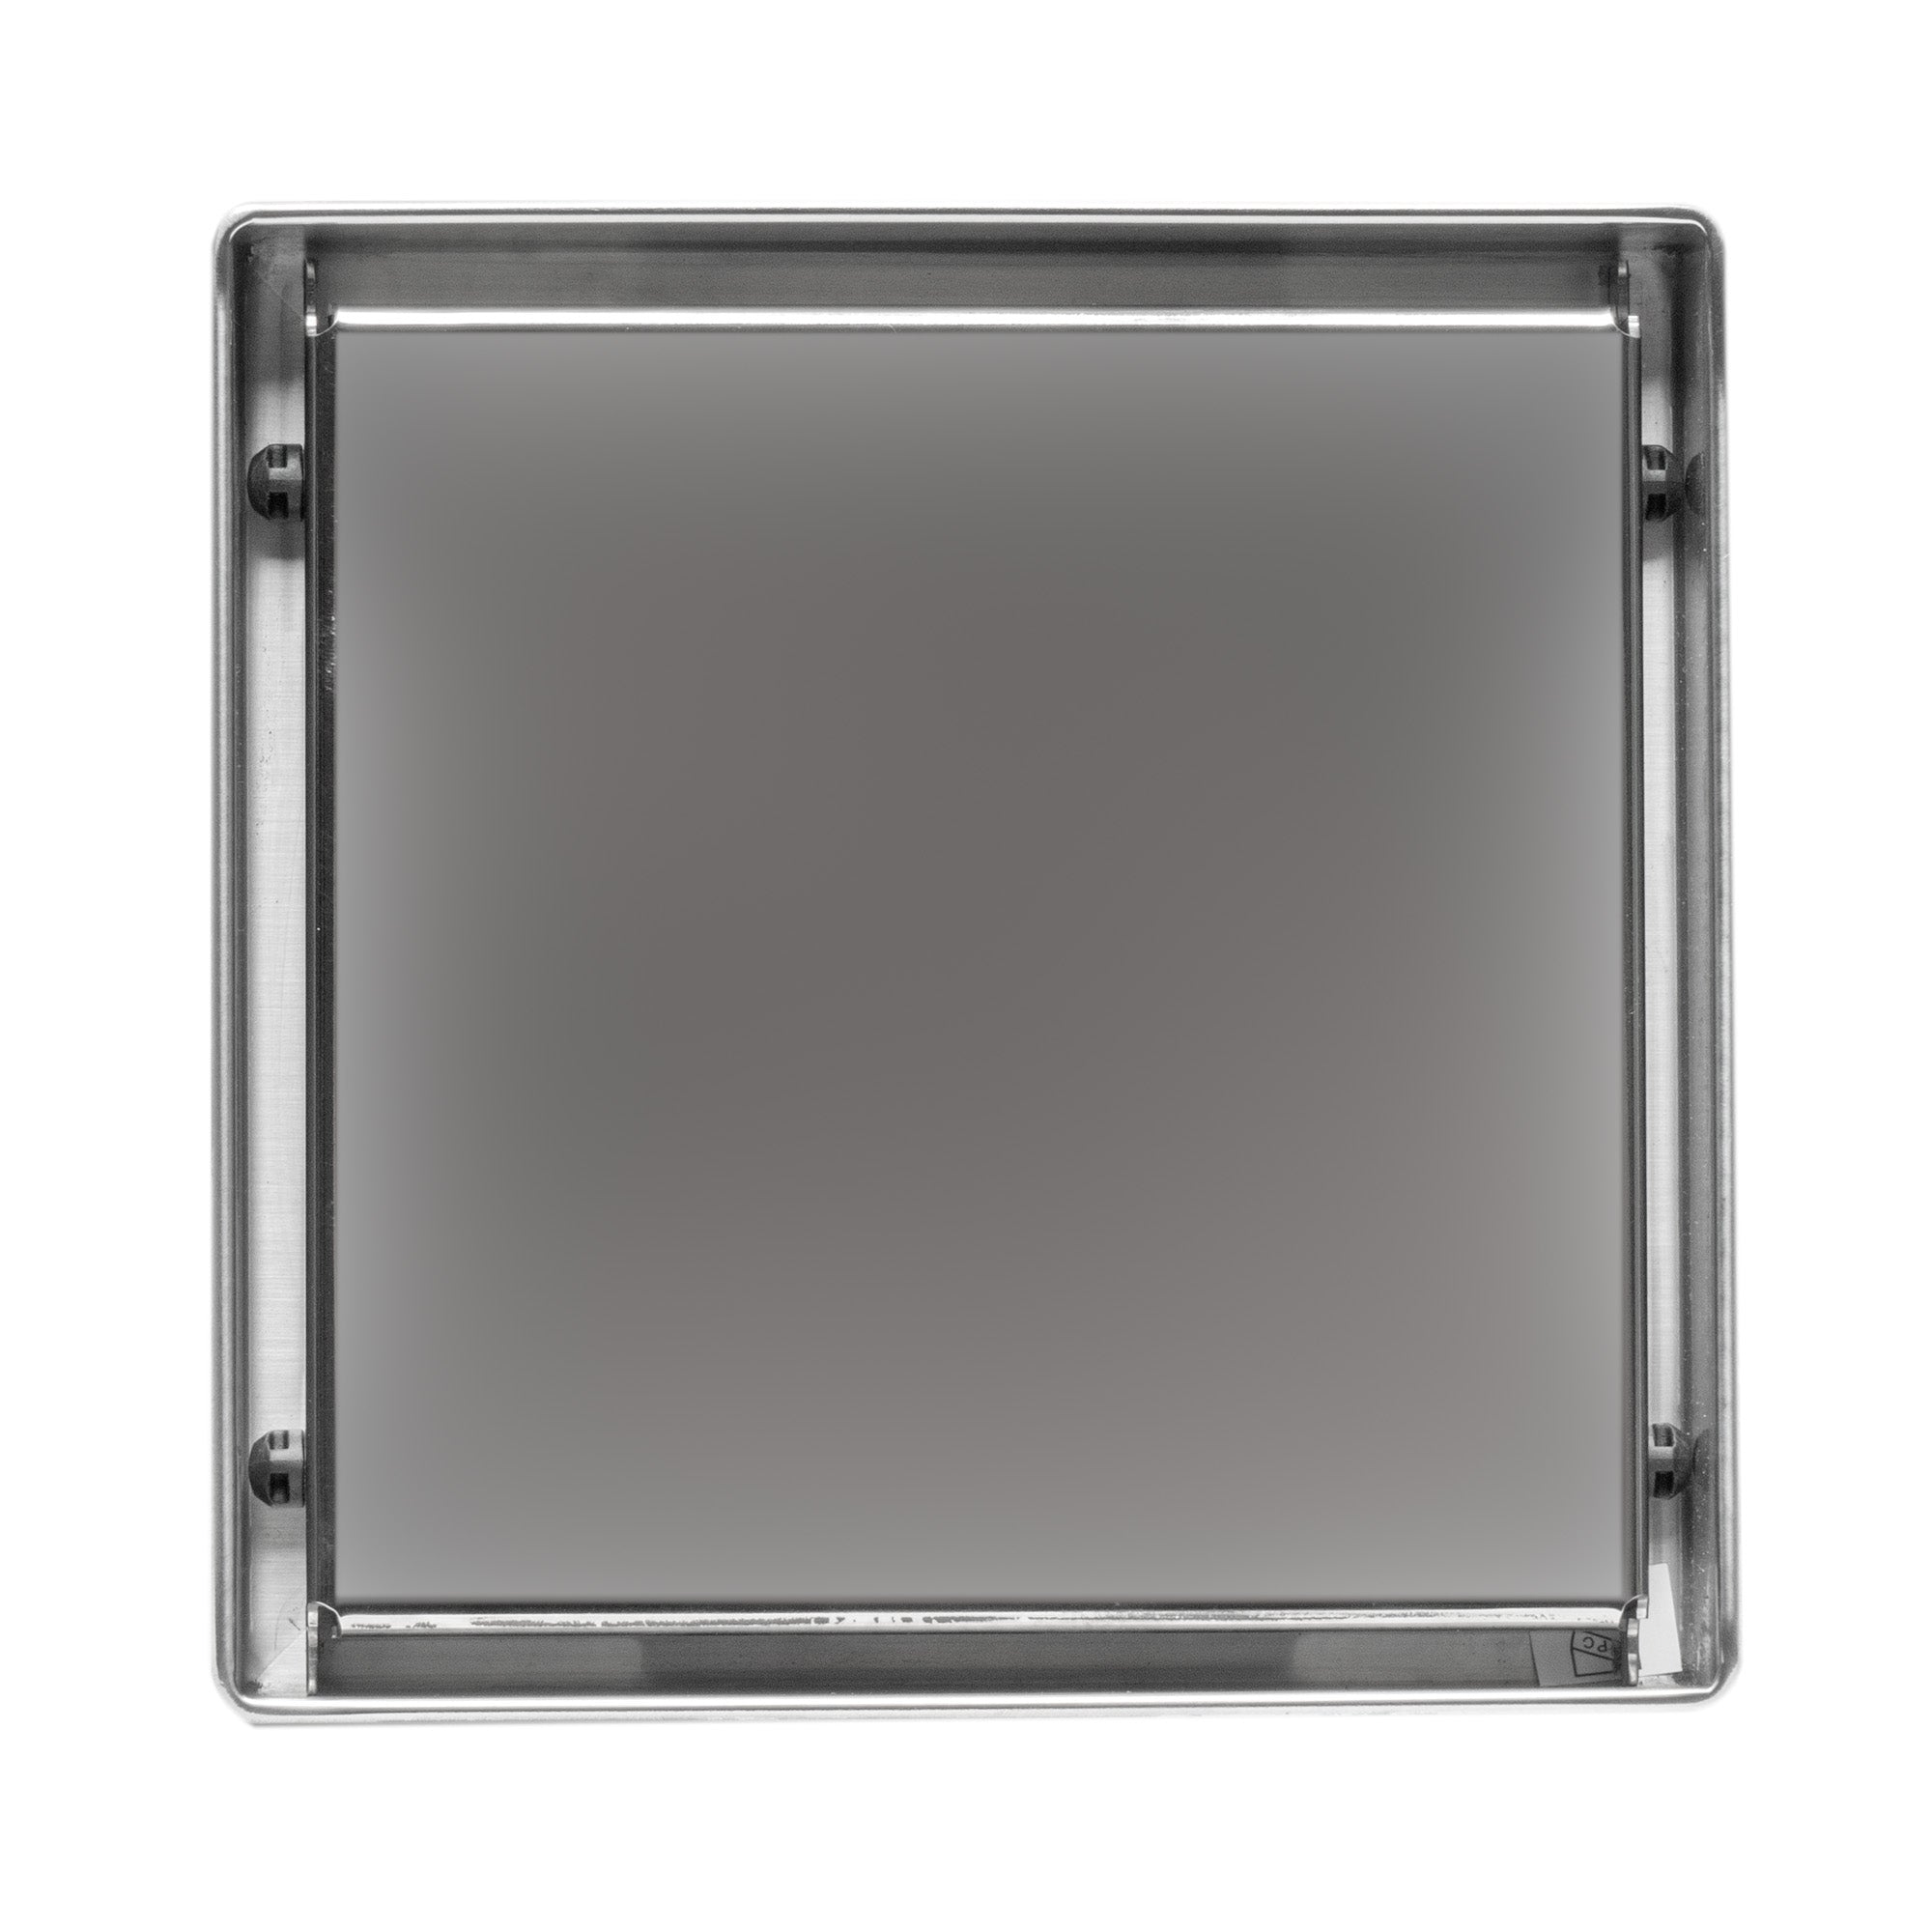 ALFI ABSD55B Modern Shower Drain Square w/ Solid Cover (5" x 5")